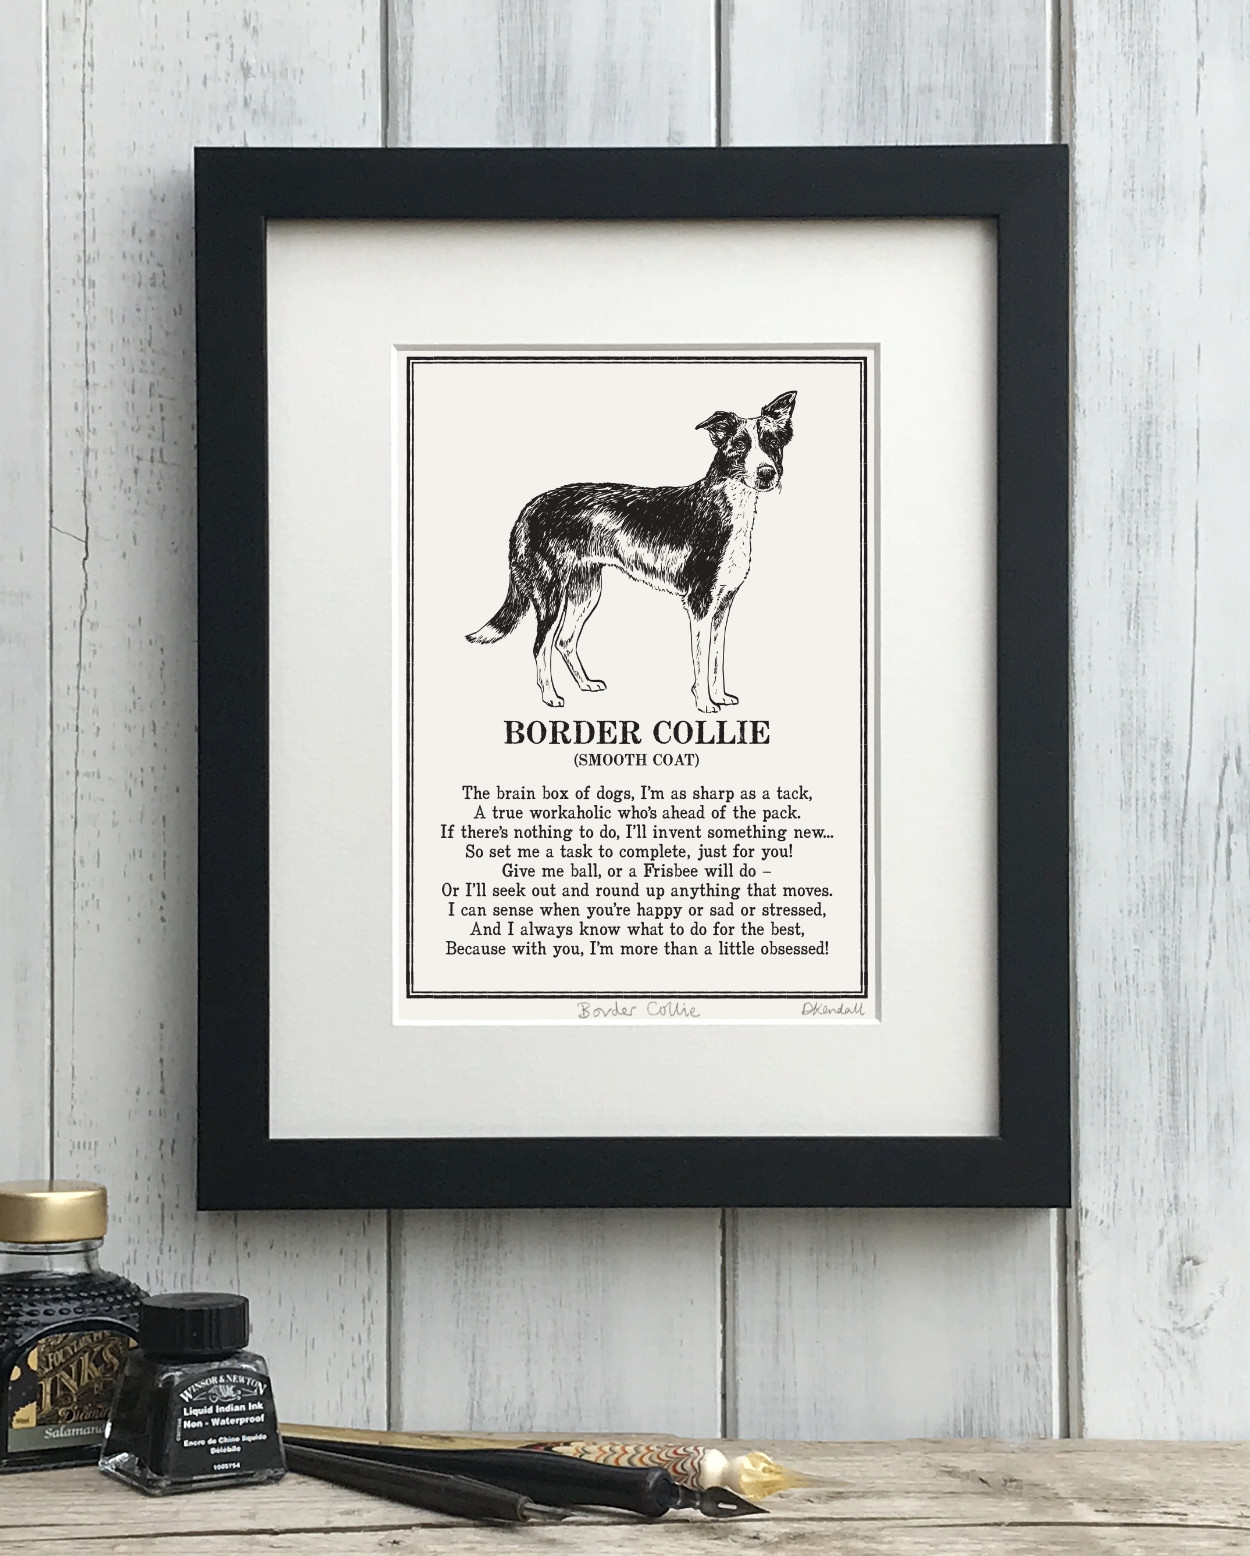 Smooth coated Border Collie Doggerel Illustrated Poem Art Print | The Enlightened Hound